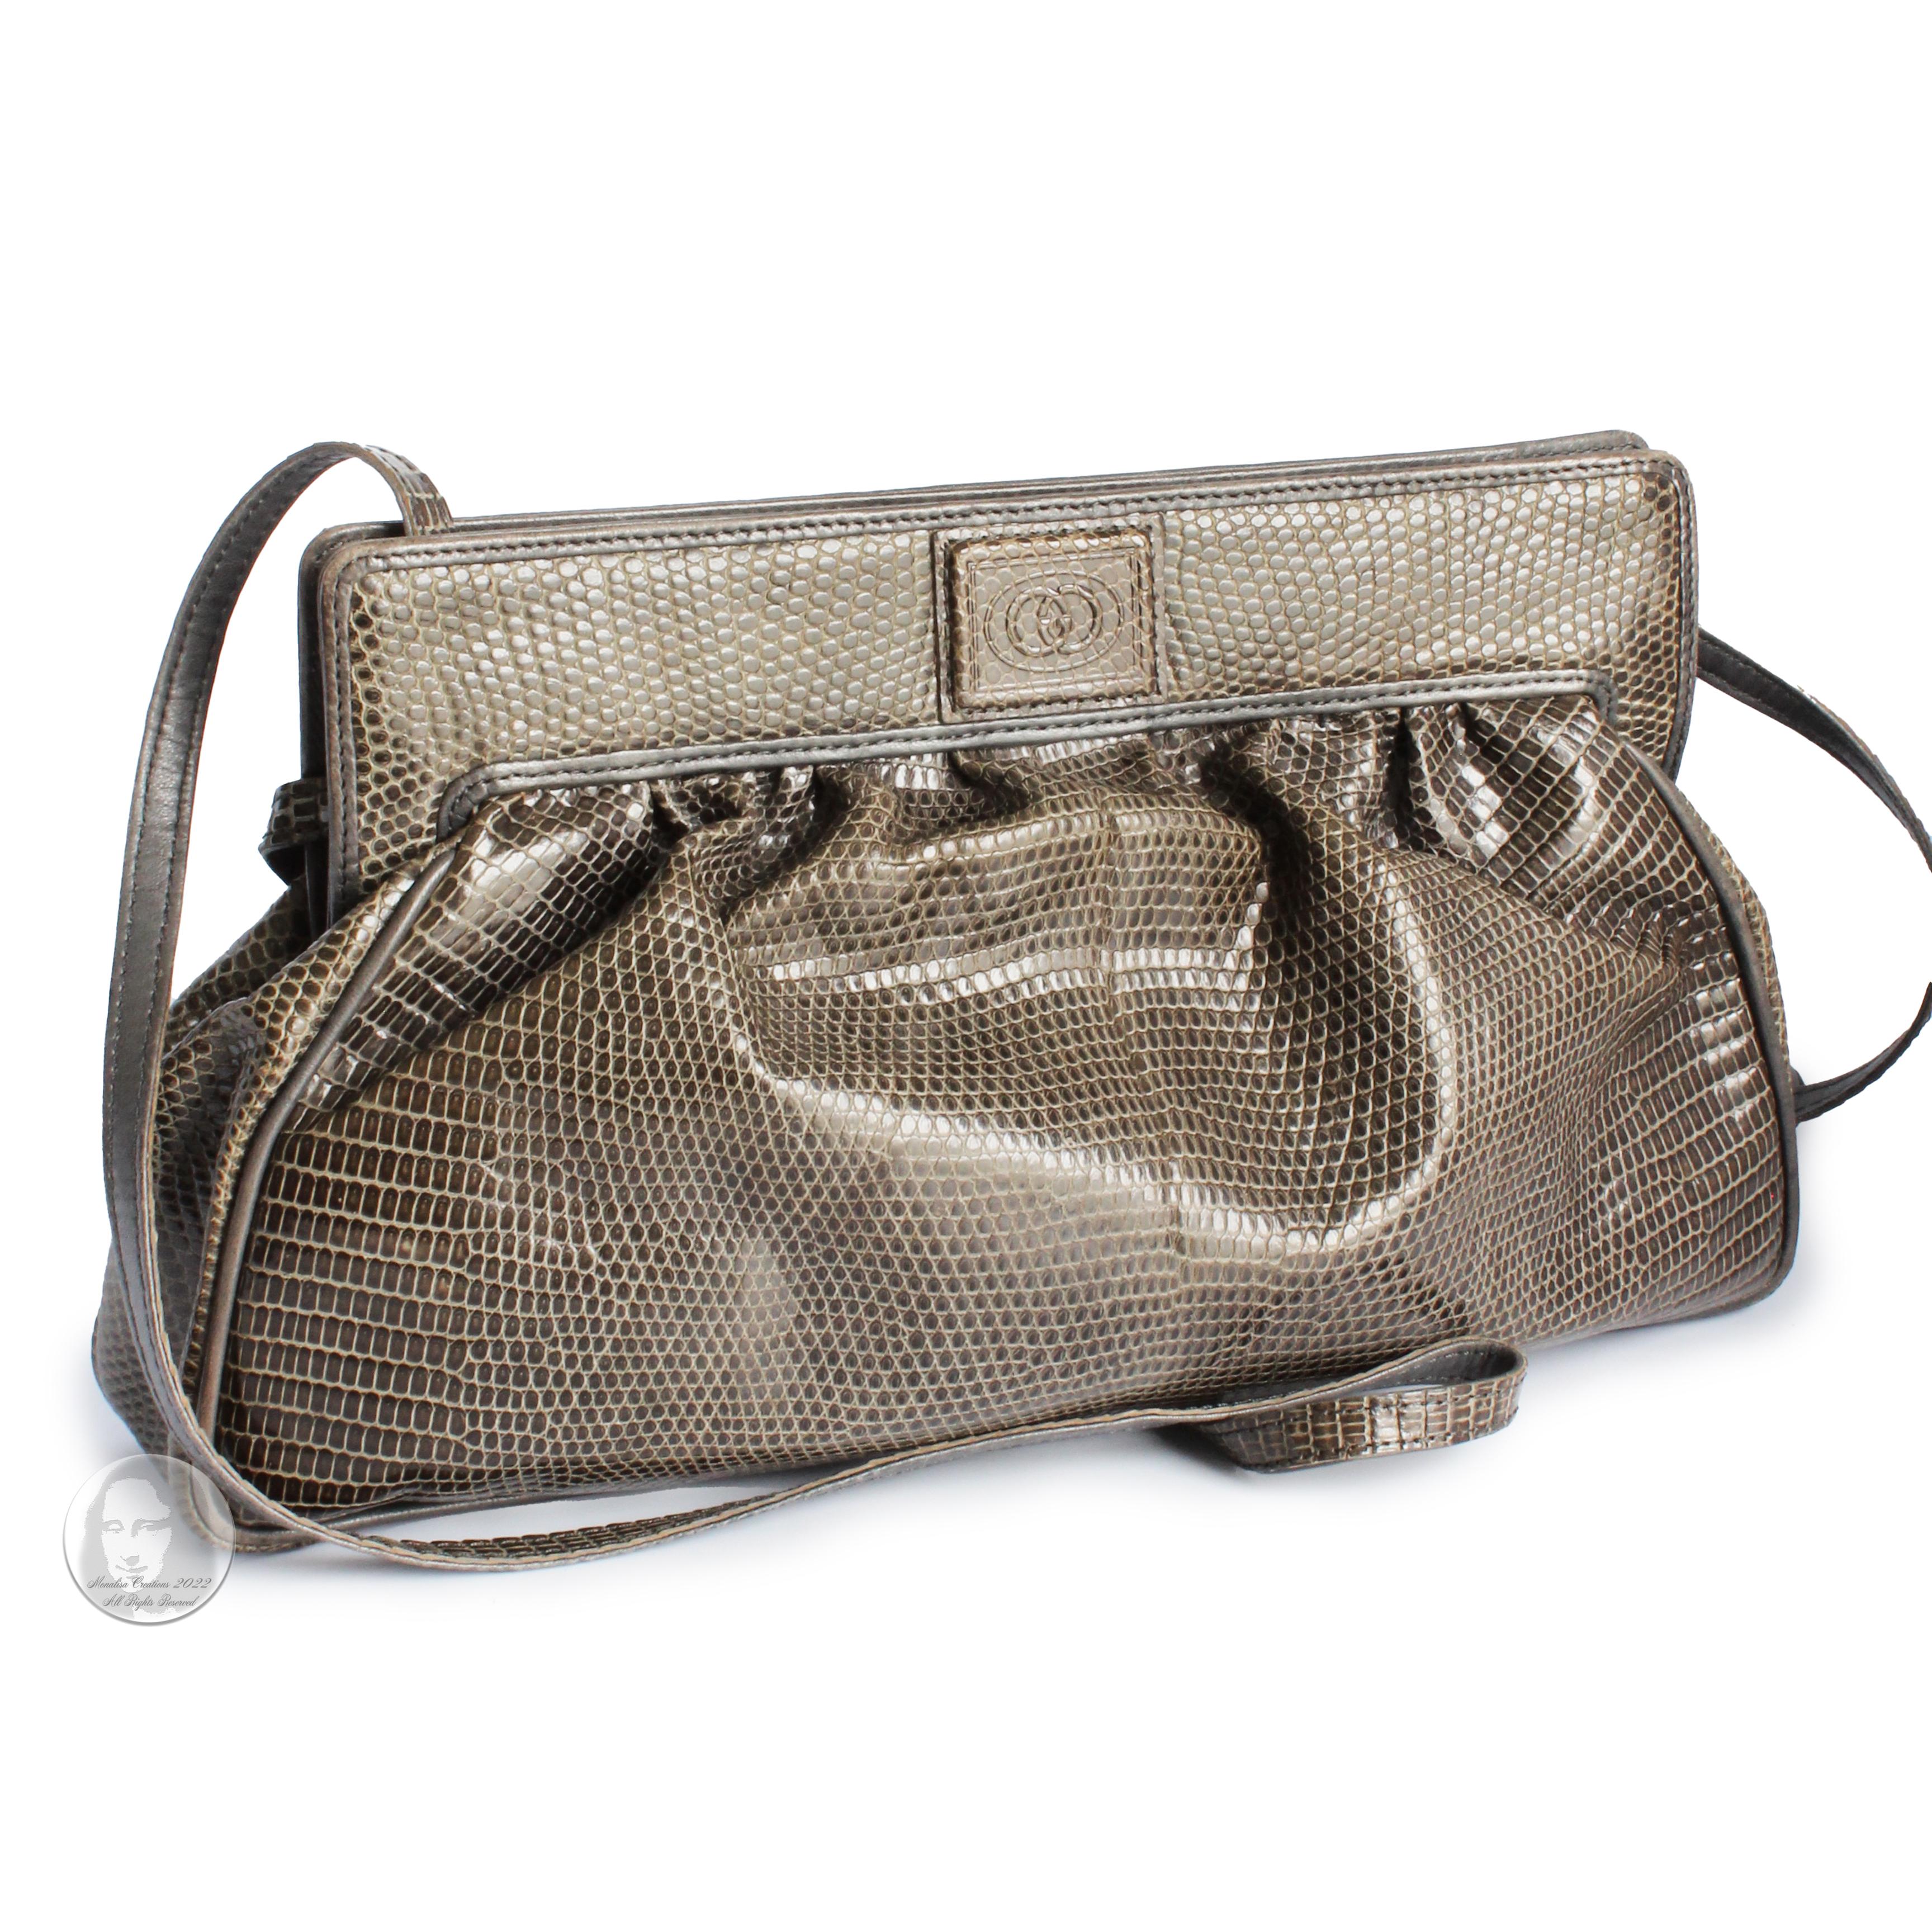 Preowned, vintage, authentic Gucci clutch, shoulder or crossbody bag, likely made in the 1980s. 

Made from exotic lizard skin in a pebble-brown hued shade with gray leather trim and lining, it features magnetic closures and a removable strap (it